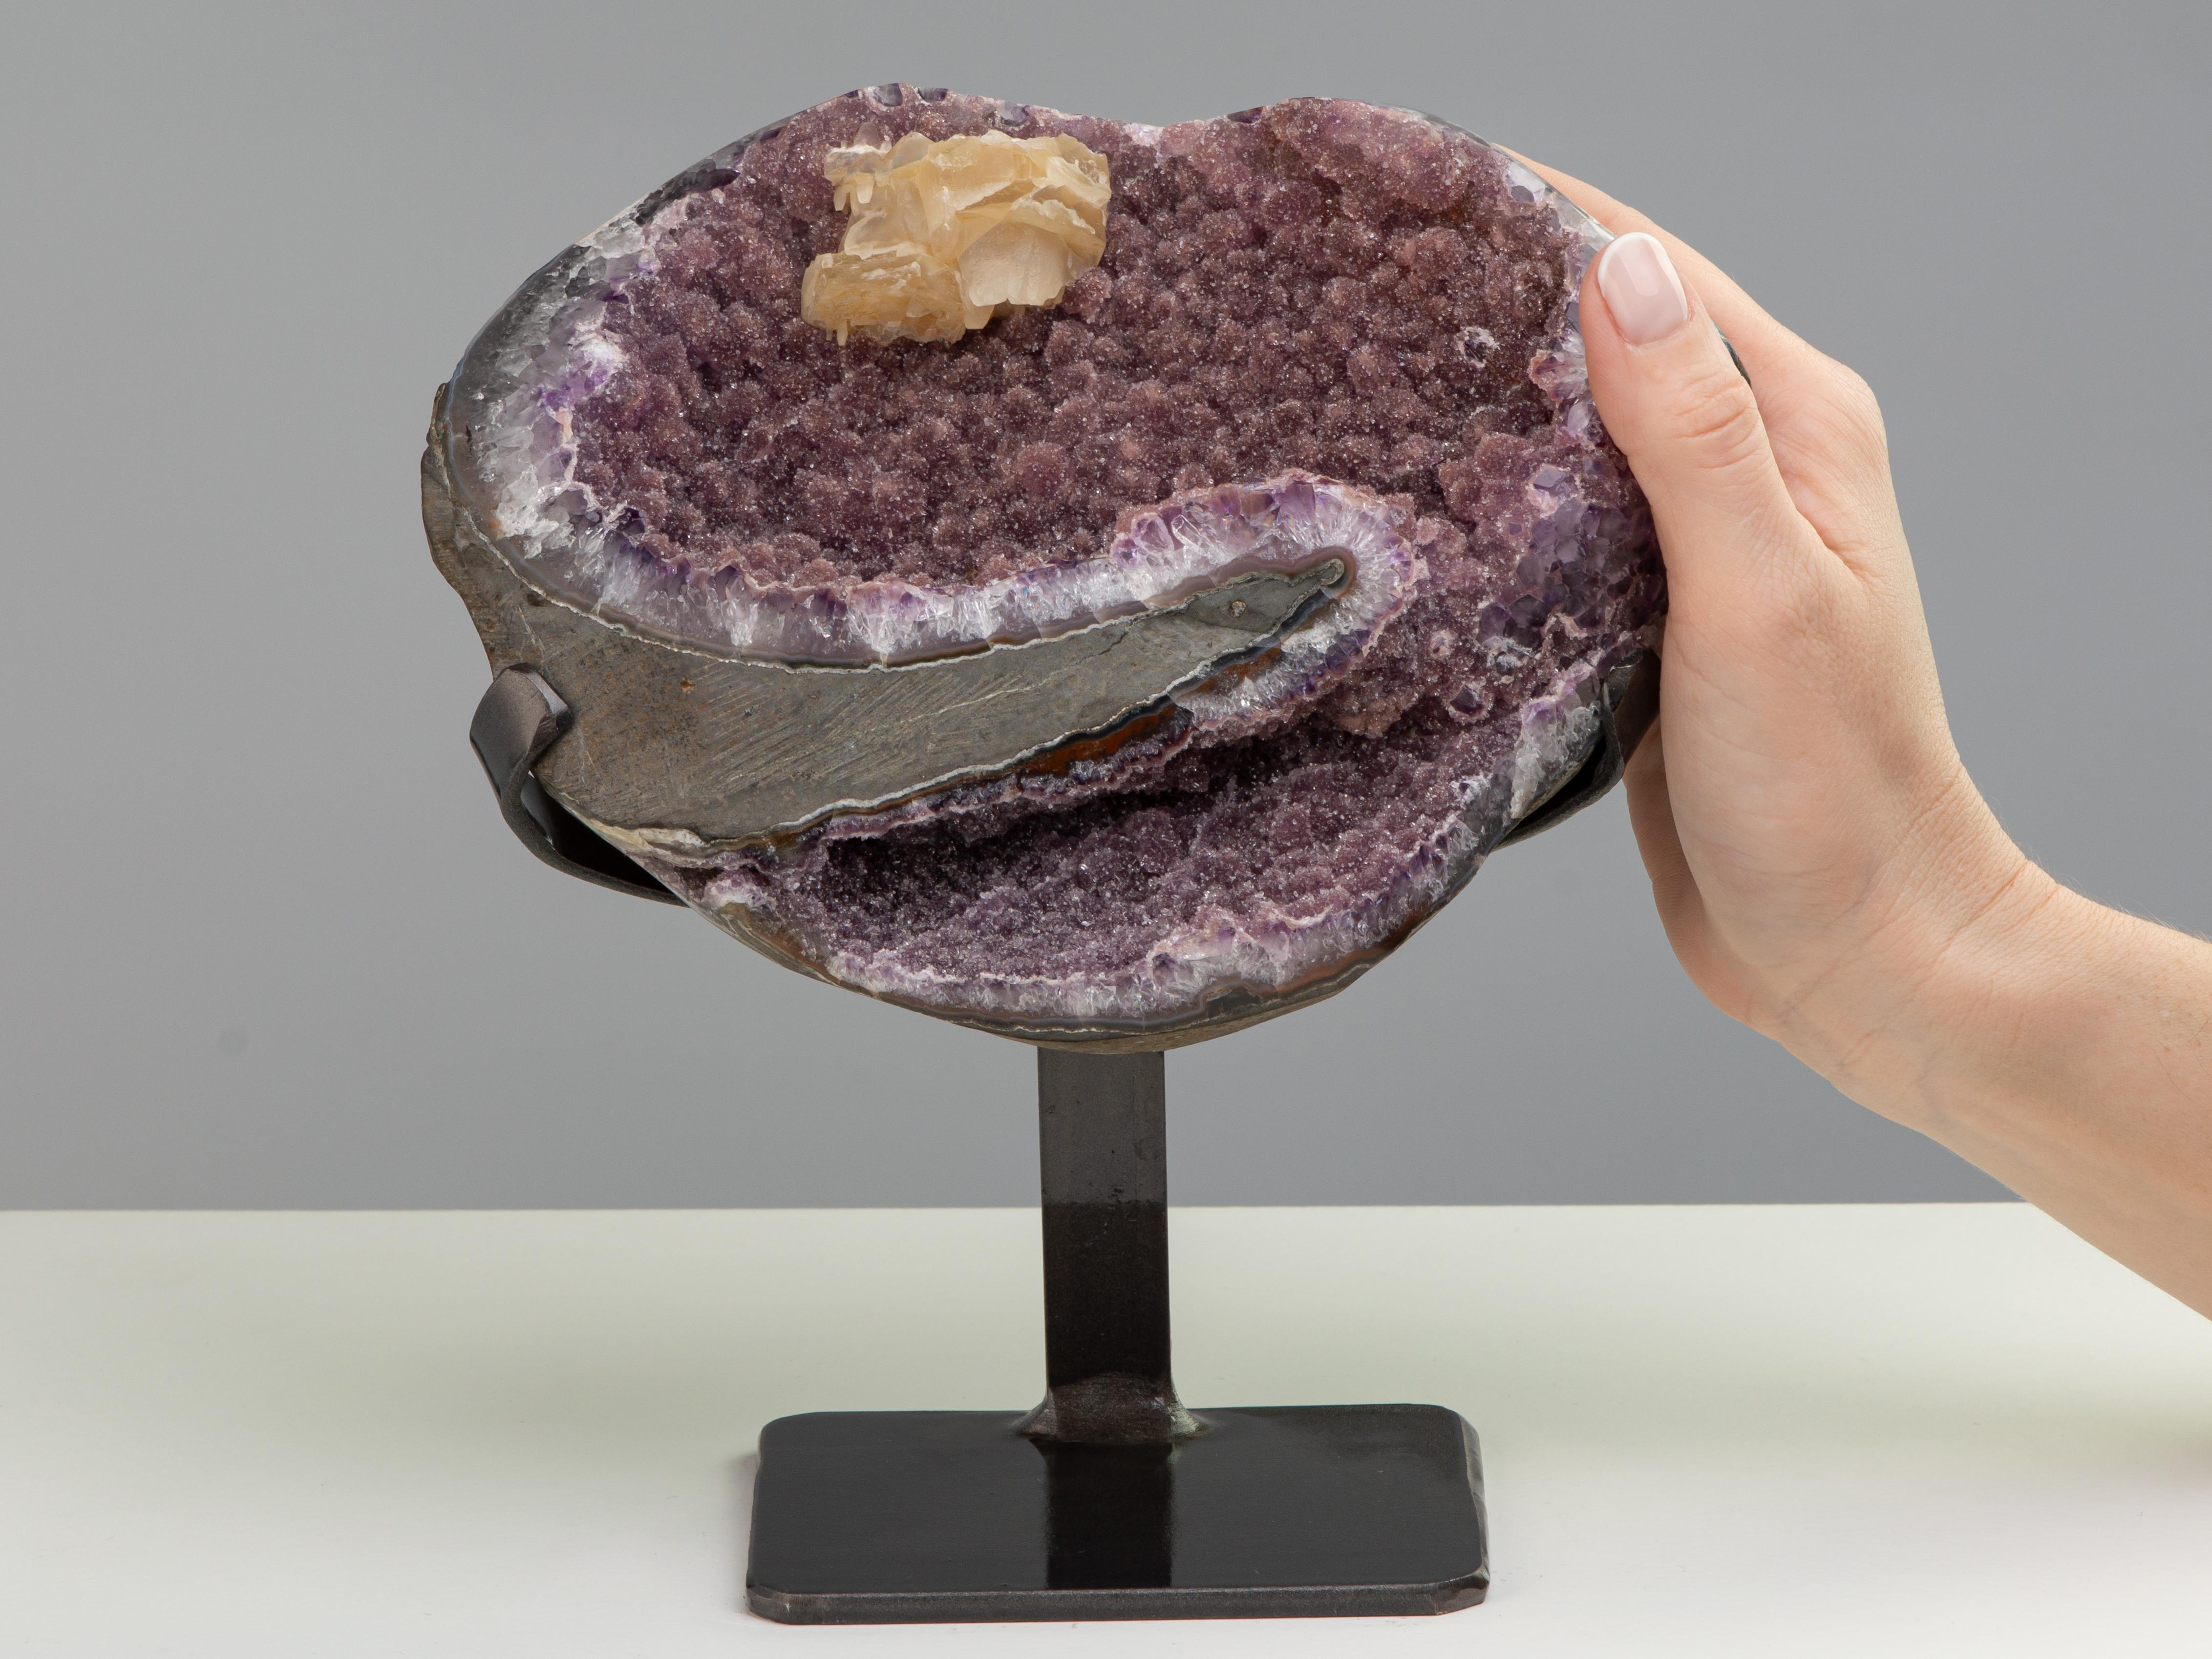 Colours fuse together in this uniquely beautiful piece, presenting the viewer with mixed of pink druze, lilac amethyst and white quartz.

A dynamic mineral sculpture, resembling a heart shape with a calcite formation at its upper section. The